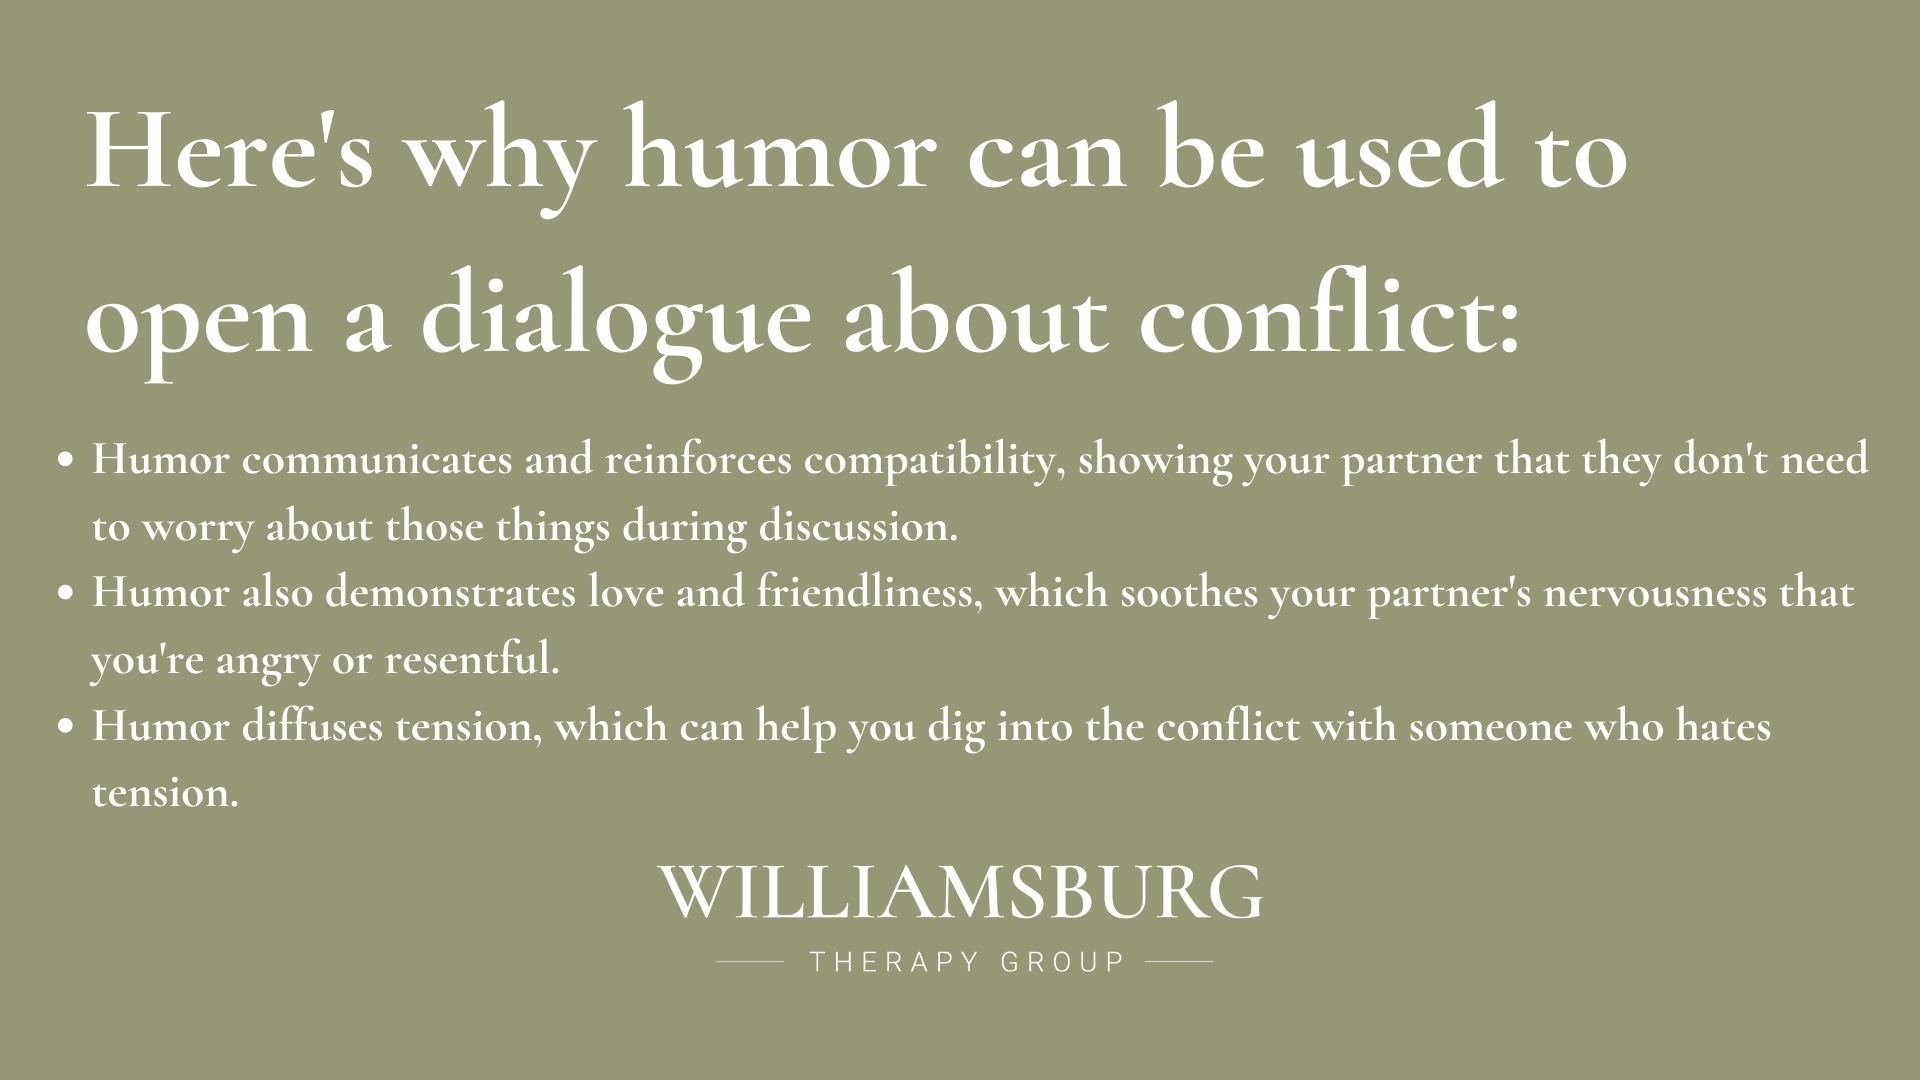 humor can be used to diffuse and then address conflict